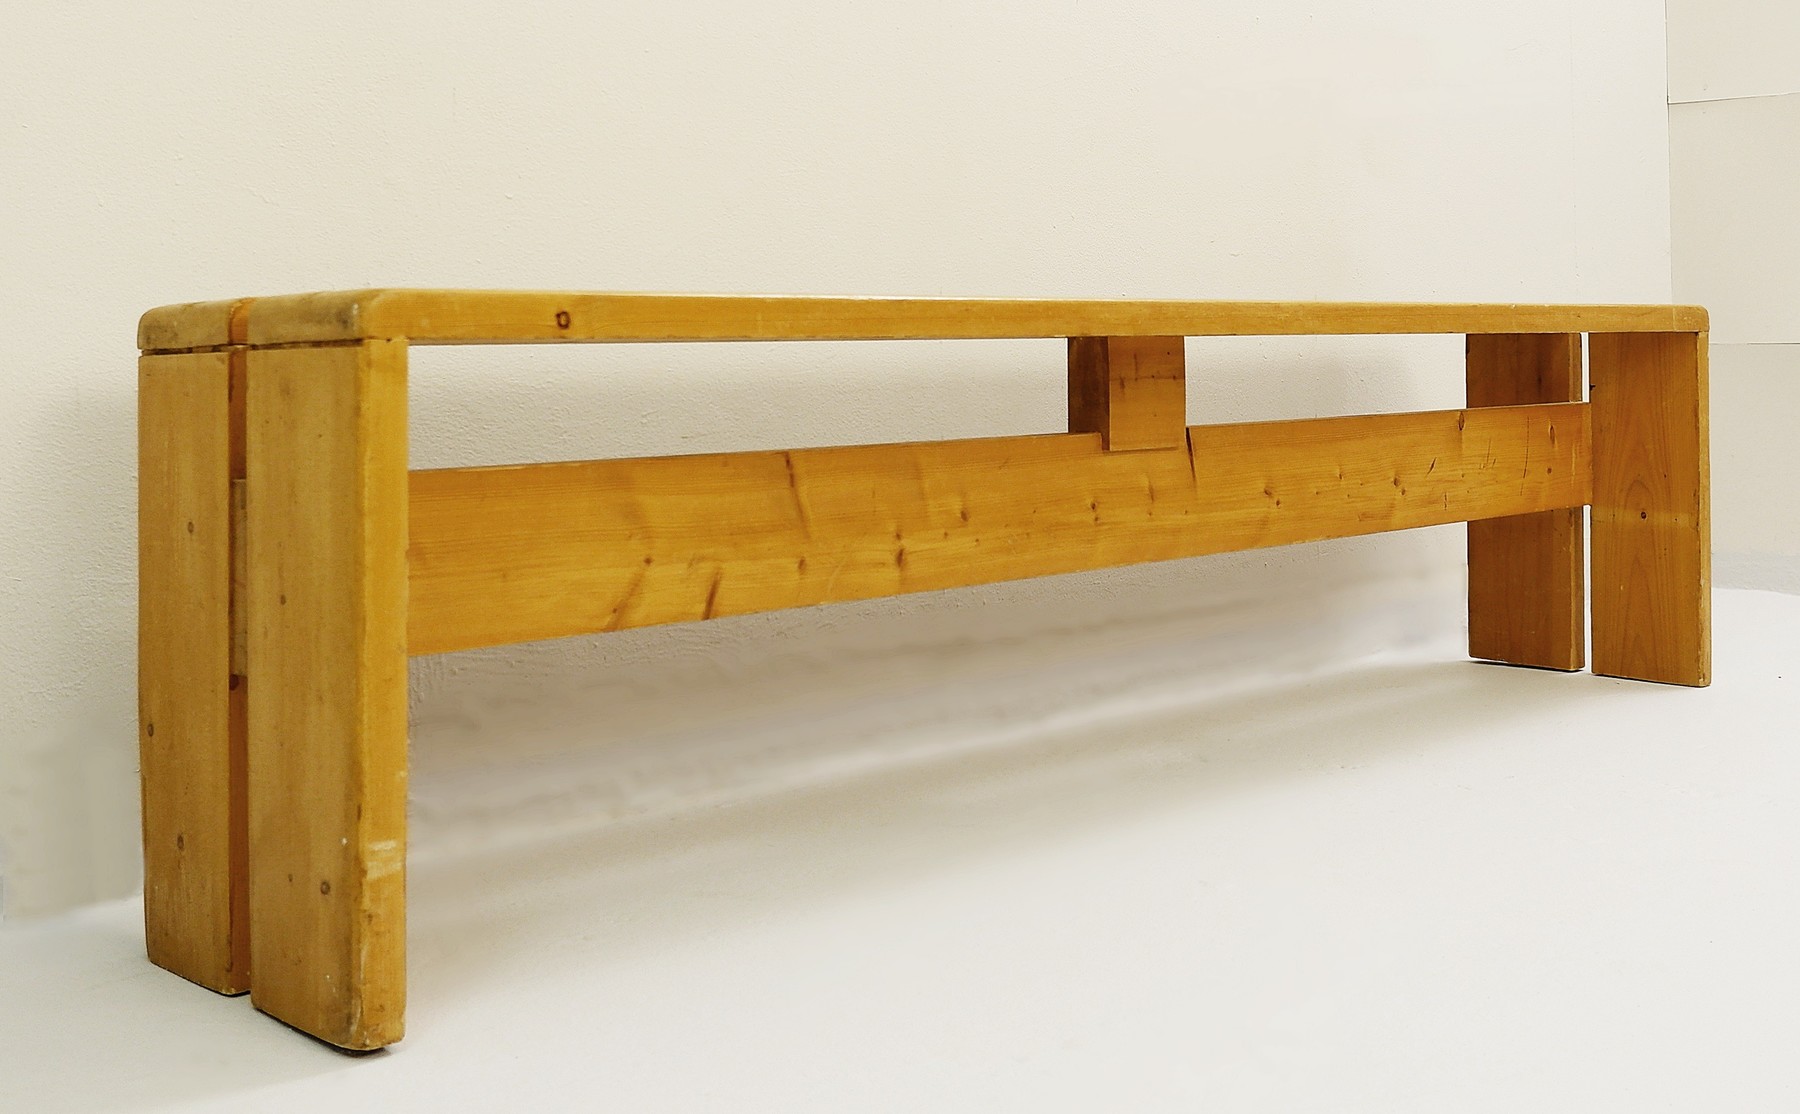 Les Arc - Pine Bench By Charlotte Perriand, 1960s - Stools / Benches - Buy  design & vintage seating online - Watteeu